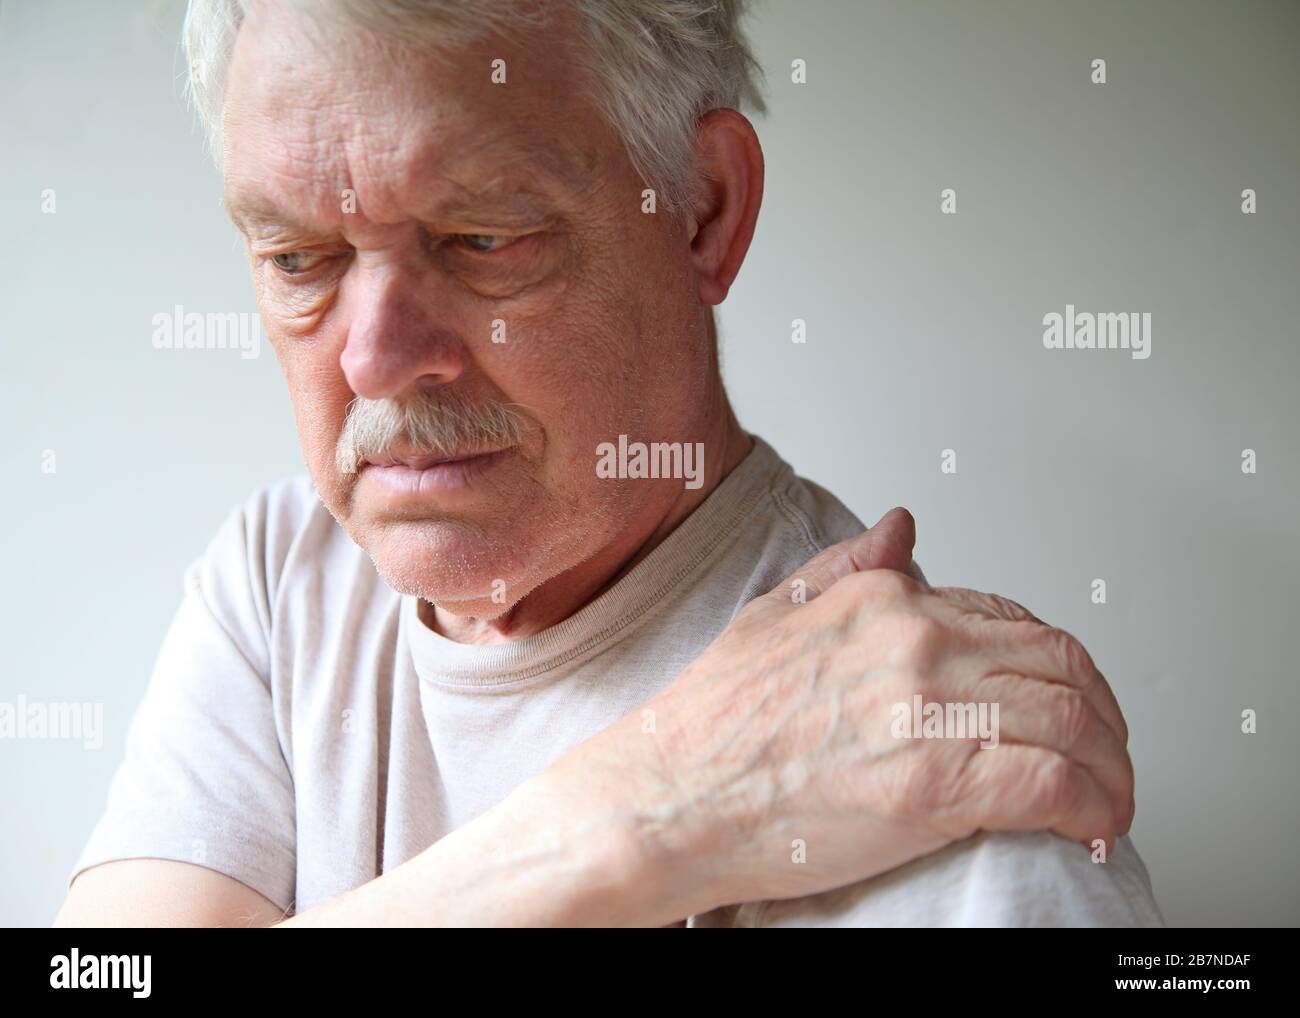 Senior experiences soreness in his shoulder joint Stock Photo